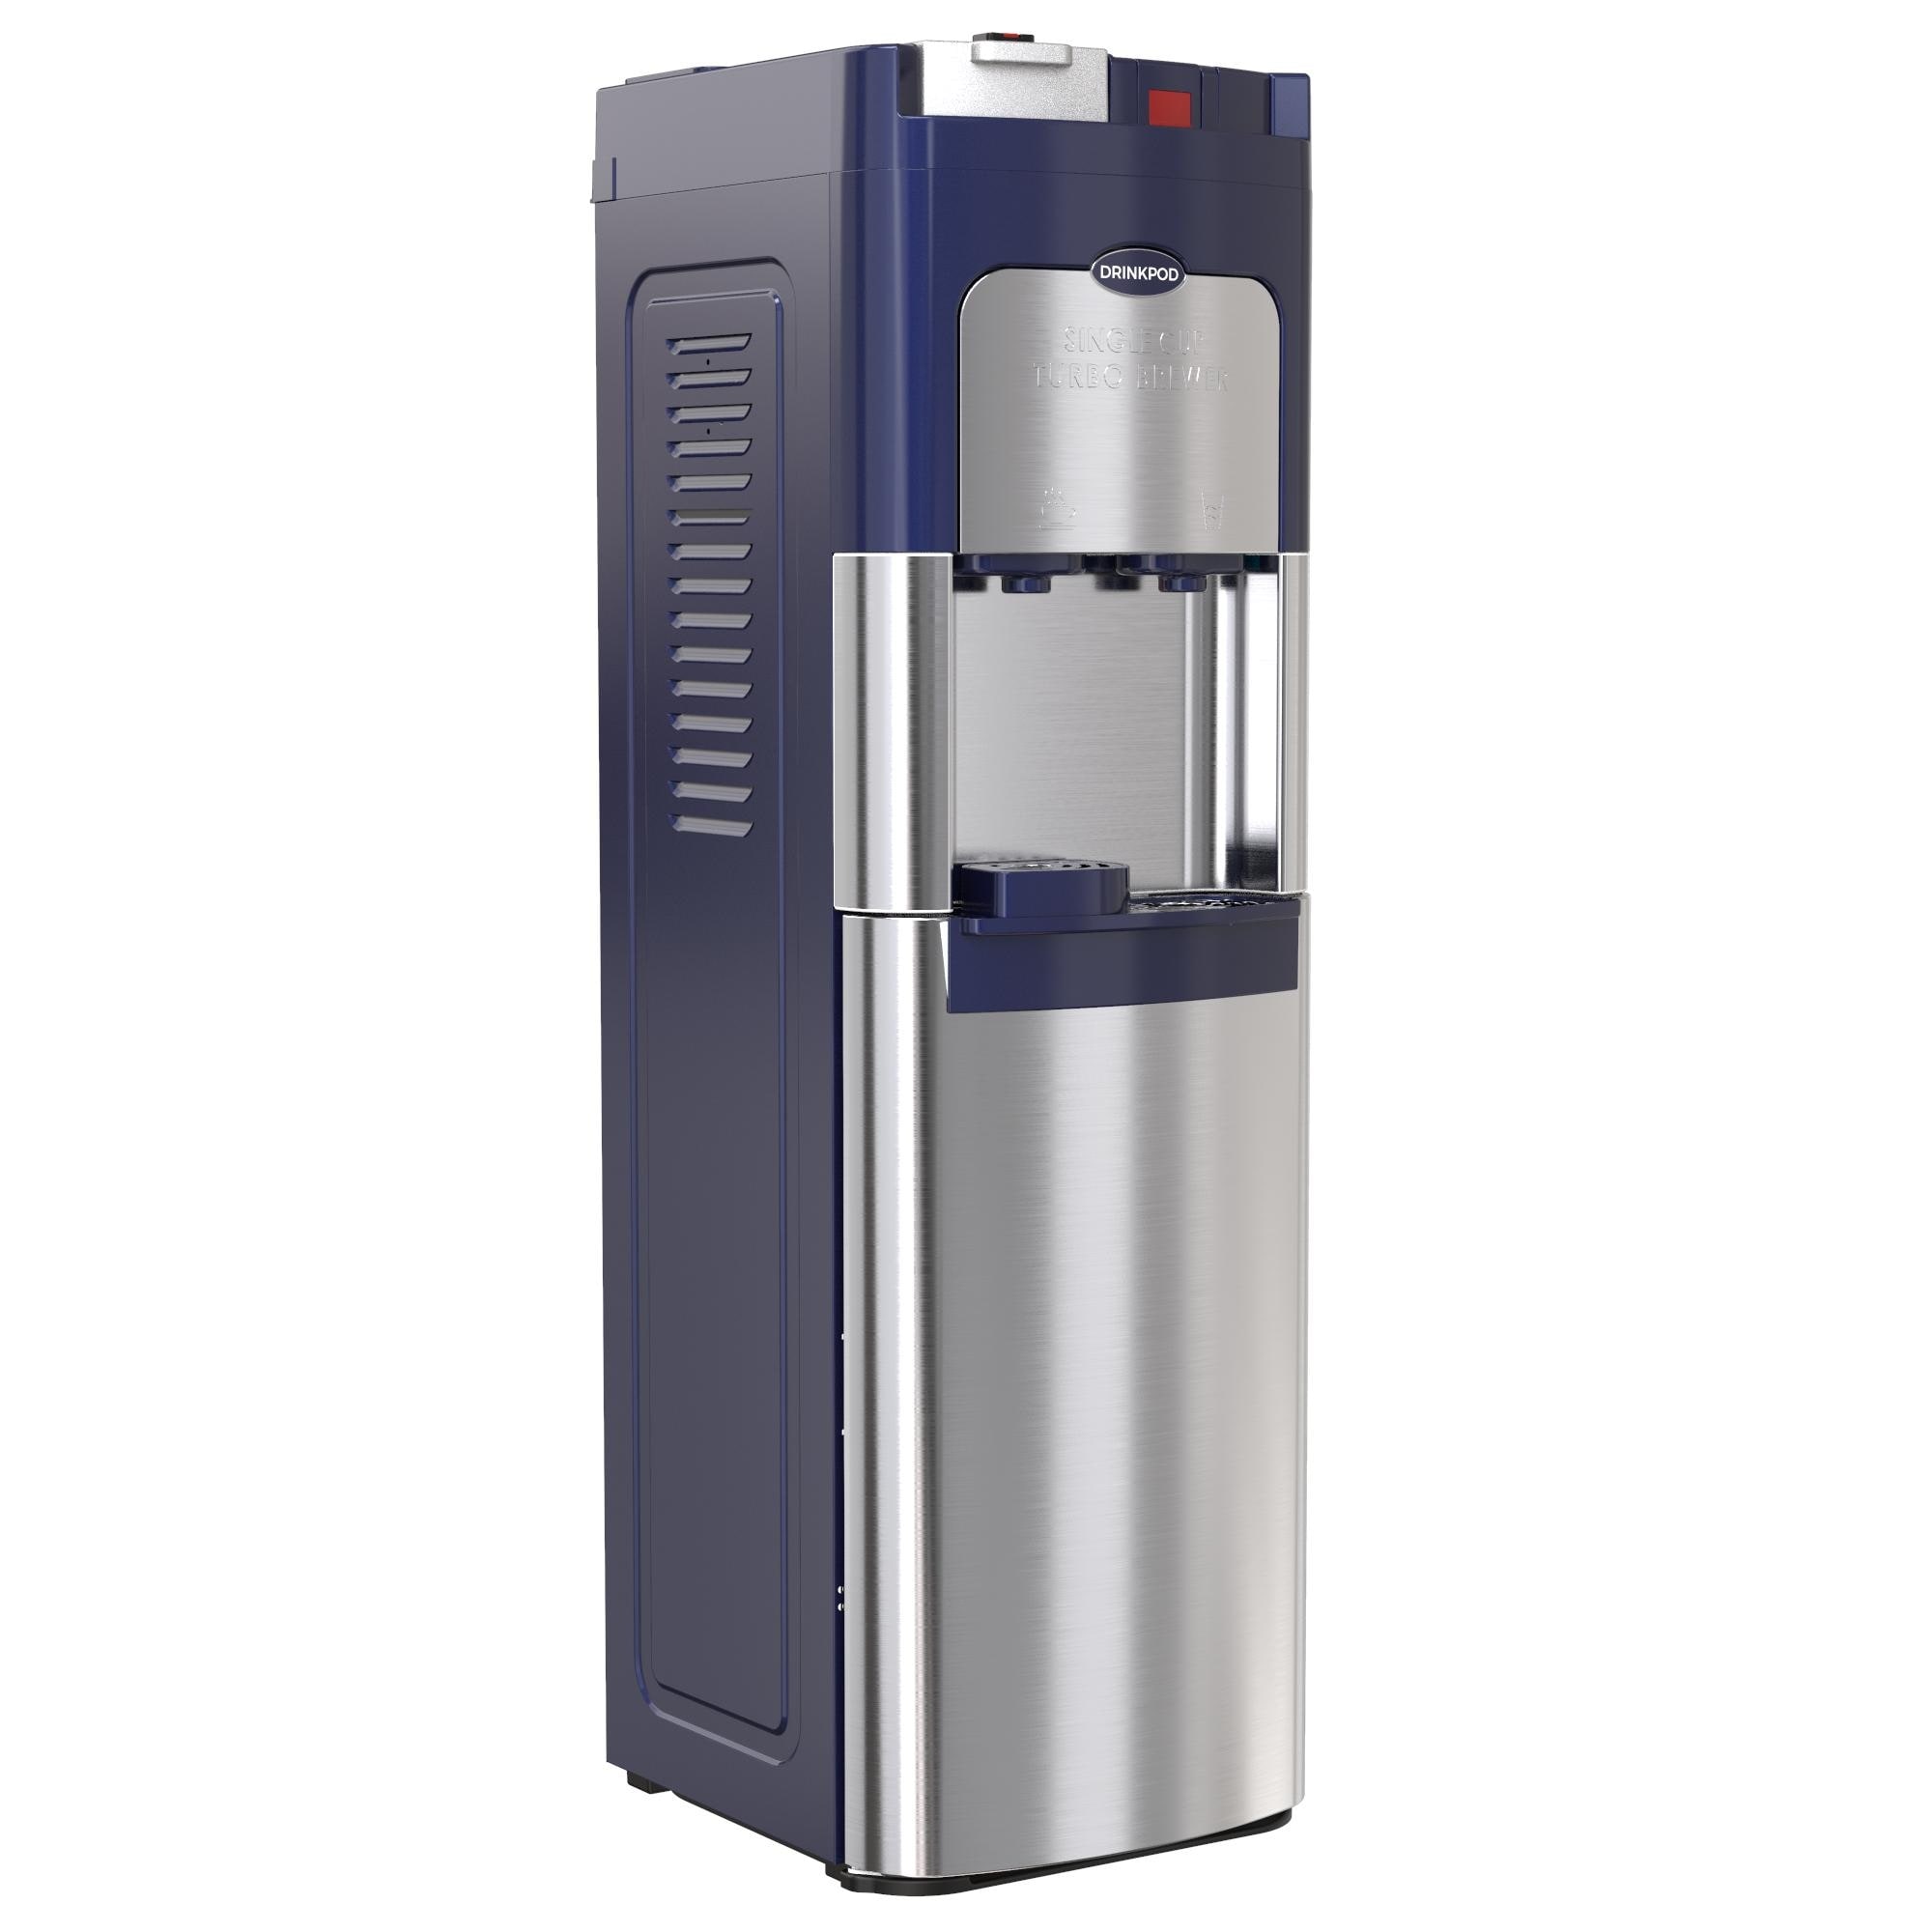 https://ak1.ostkcdn.com/images/products/is/images/direct/2eb0ef7d8b4f04eb07eb45c91051ea2c83dbb48b/3000-Elite-Series-Bottleless-Water-Cooler-With-4-Filters-and-Integrated-K-Cup-Coffee-Maker.jpg